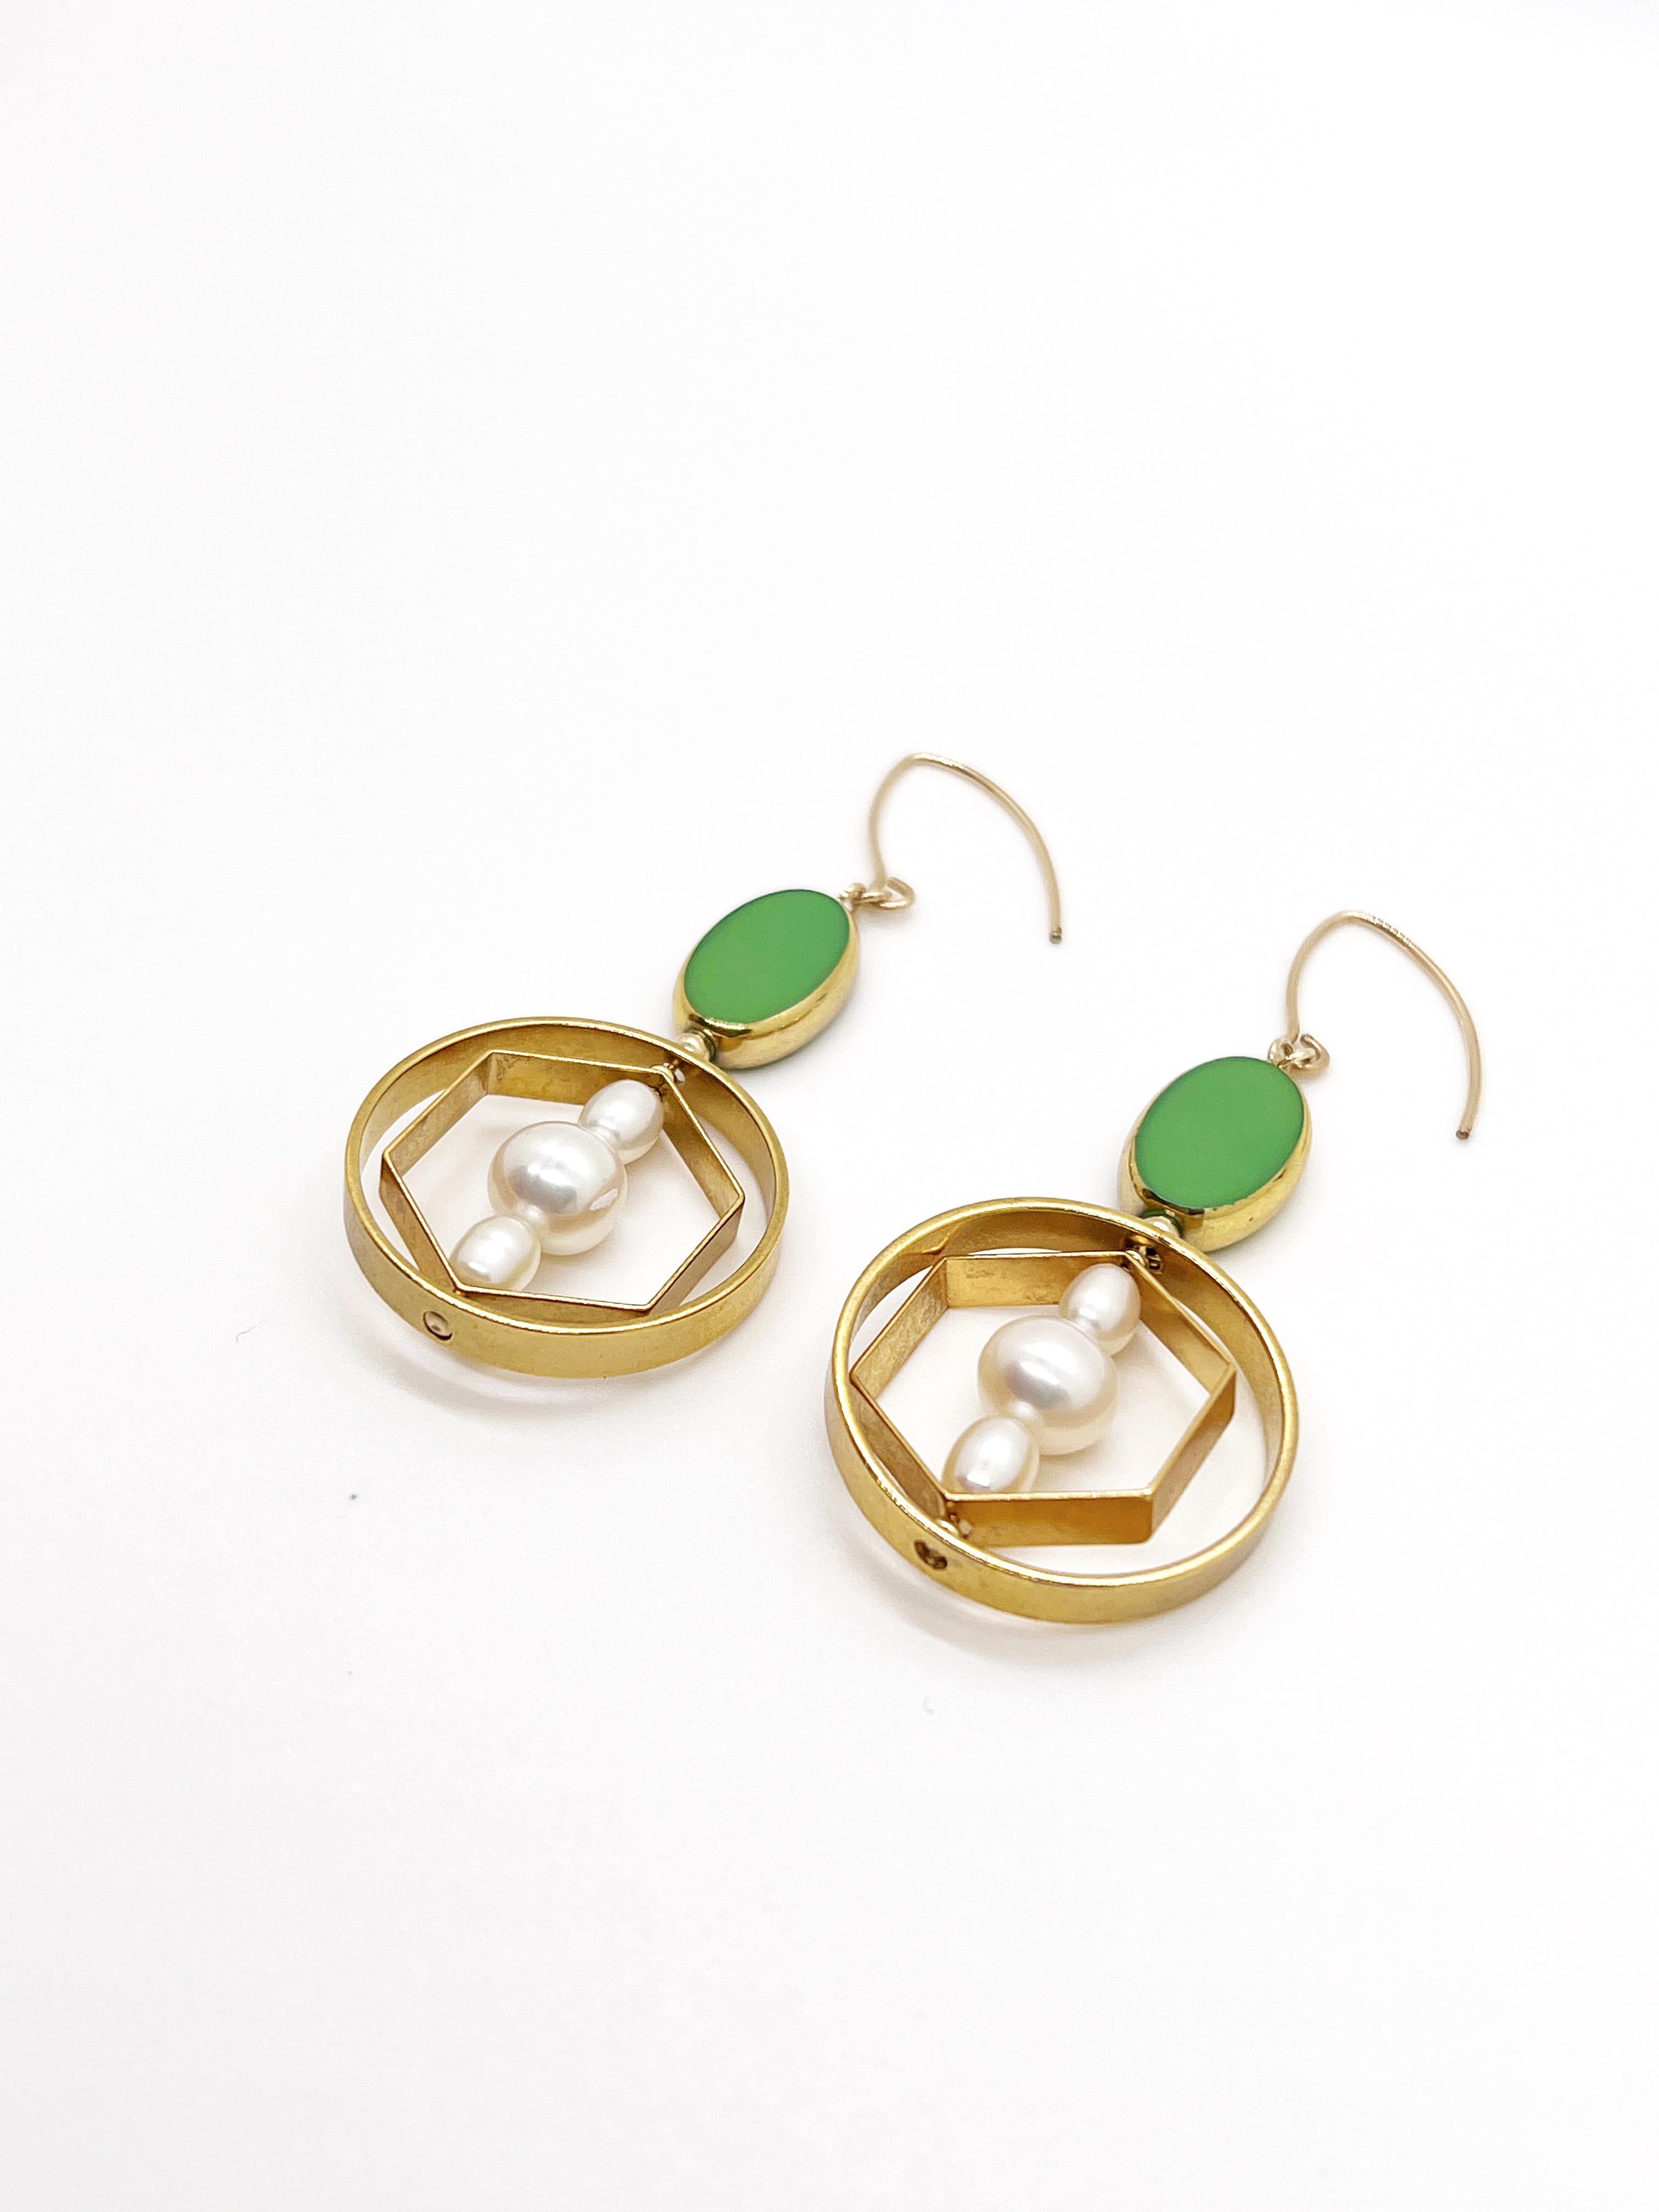 These earrings are light weight. It is composed of Green Oval  German Vintage Glass Beads that are edged with 24K gold. It is incorporated with oval freshwater pearls set in a 24K gold plated brass geometric frame. The earrings had been e-coated for